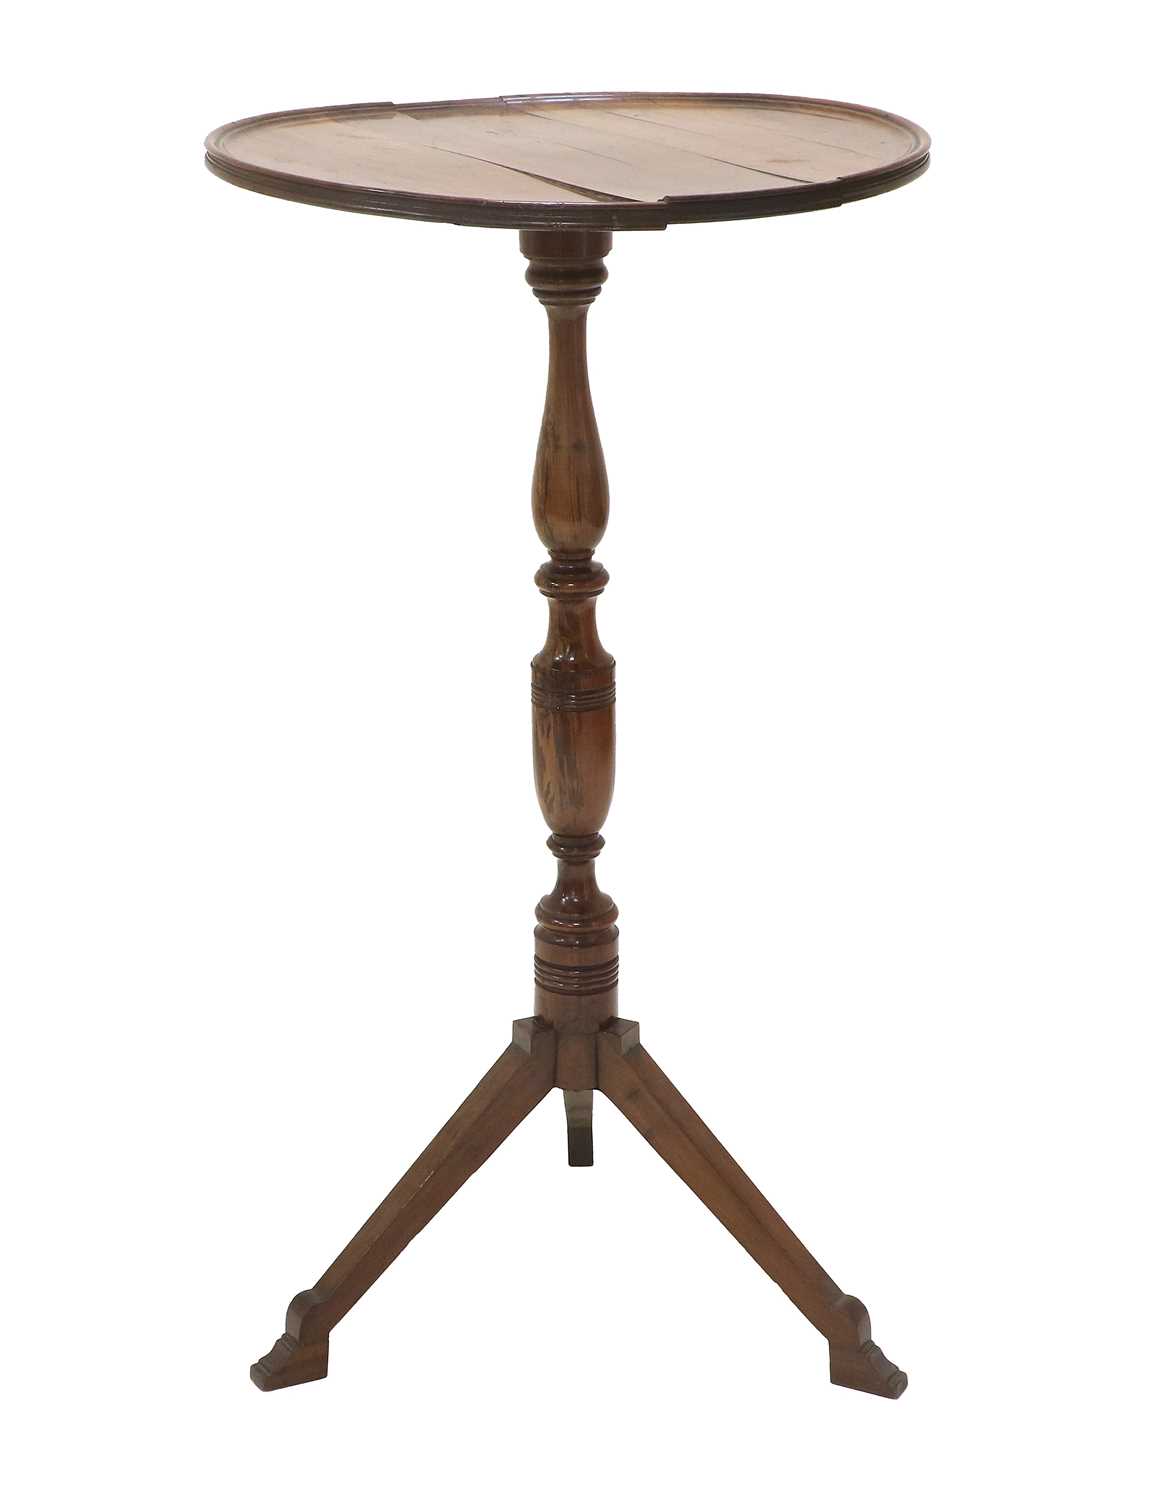 An Early 19th Century Solid Yewwood Tripod Table, the top of dished circular form, on a baluster